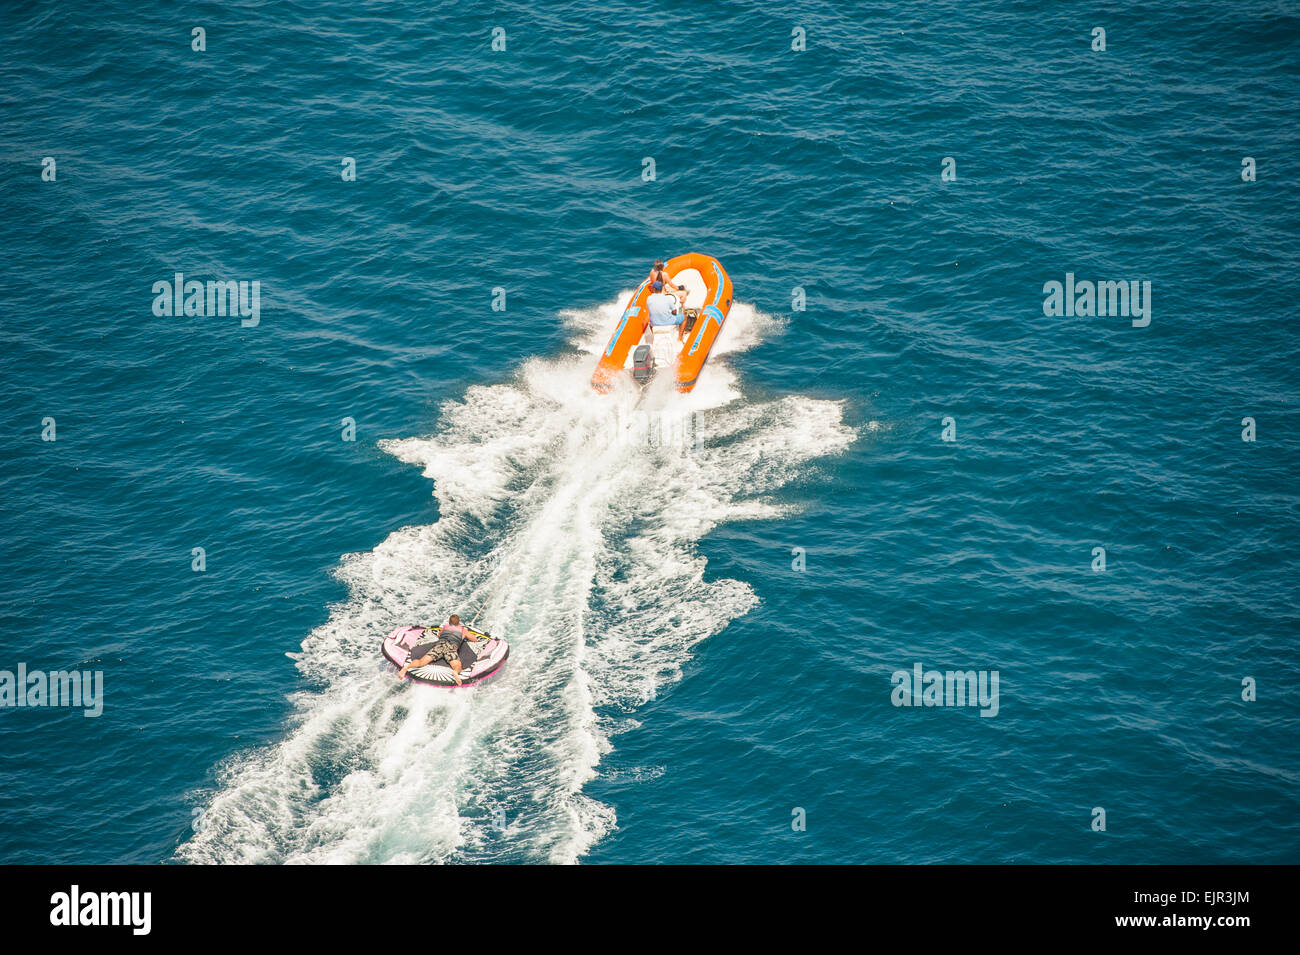 Inflatable toy being towed behind a speed boat during summer tropical sea holiday vacation Stock Photo